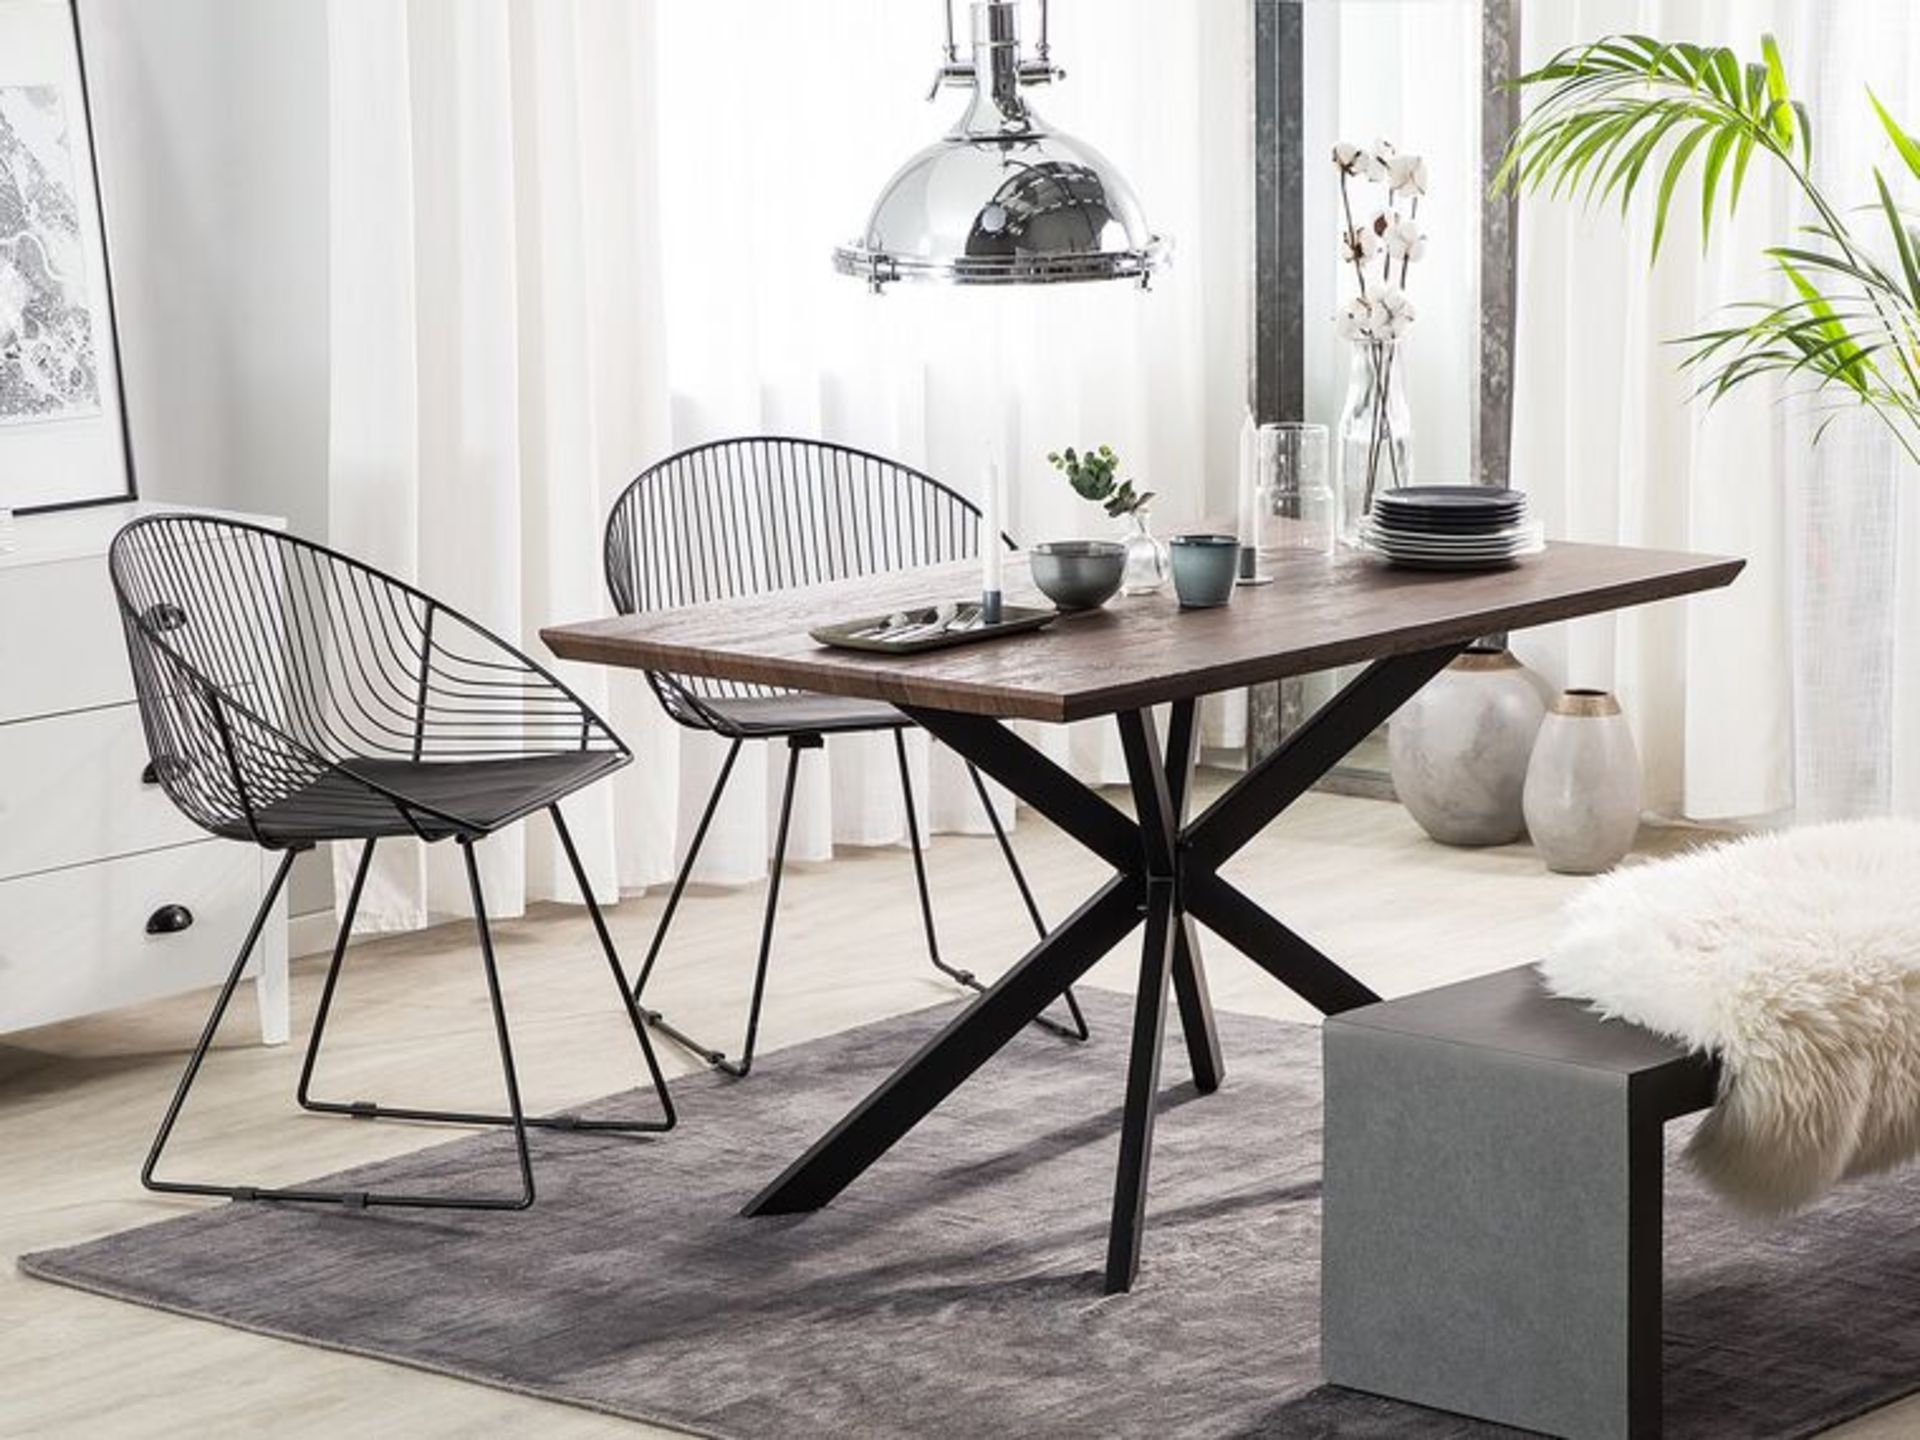 Spectra Dining Table 140 x 80 cm Dark Wood with Black. - SR6. RRP £529.99. Add an instant upgrade to - Image 2 of 2